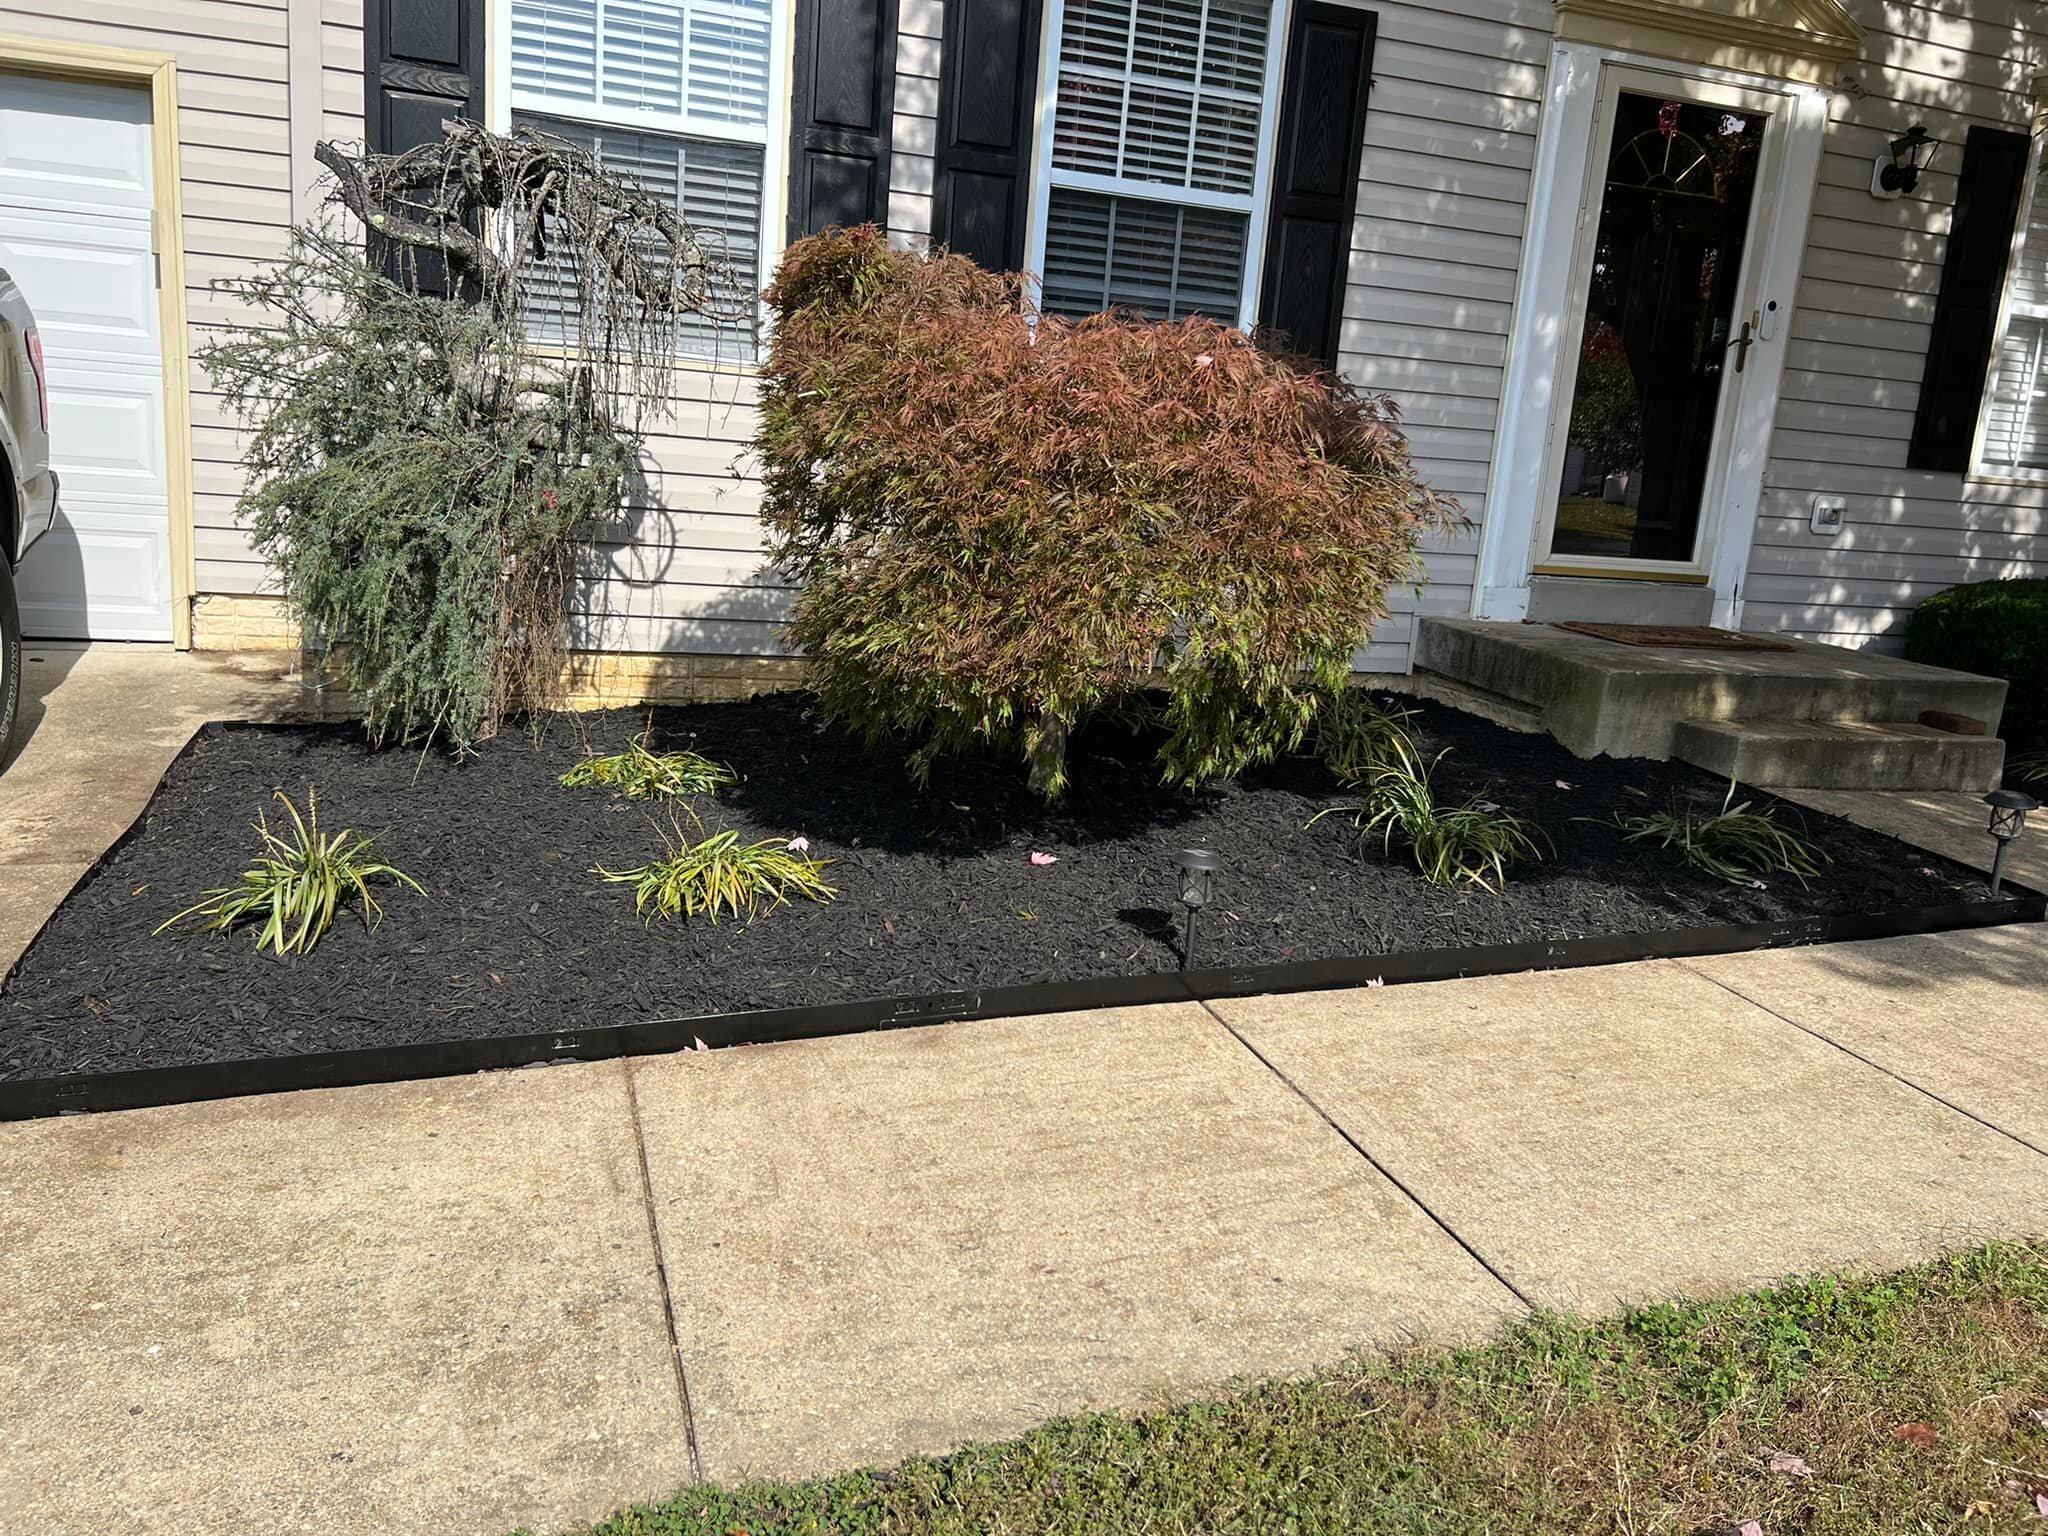 Fall cleanup time. New Metal edging installation of plants and dyed black mulch.